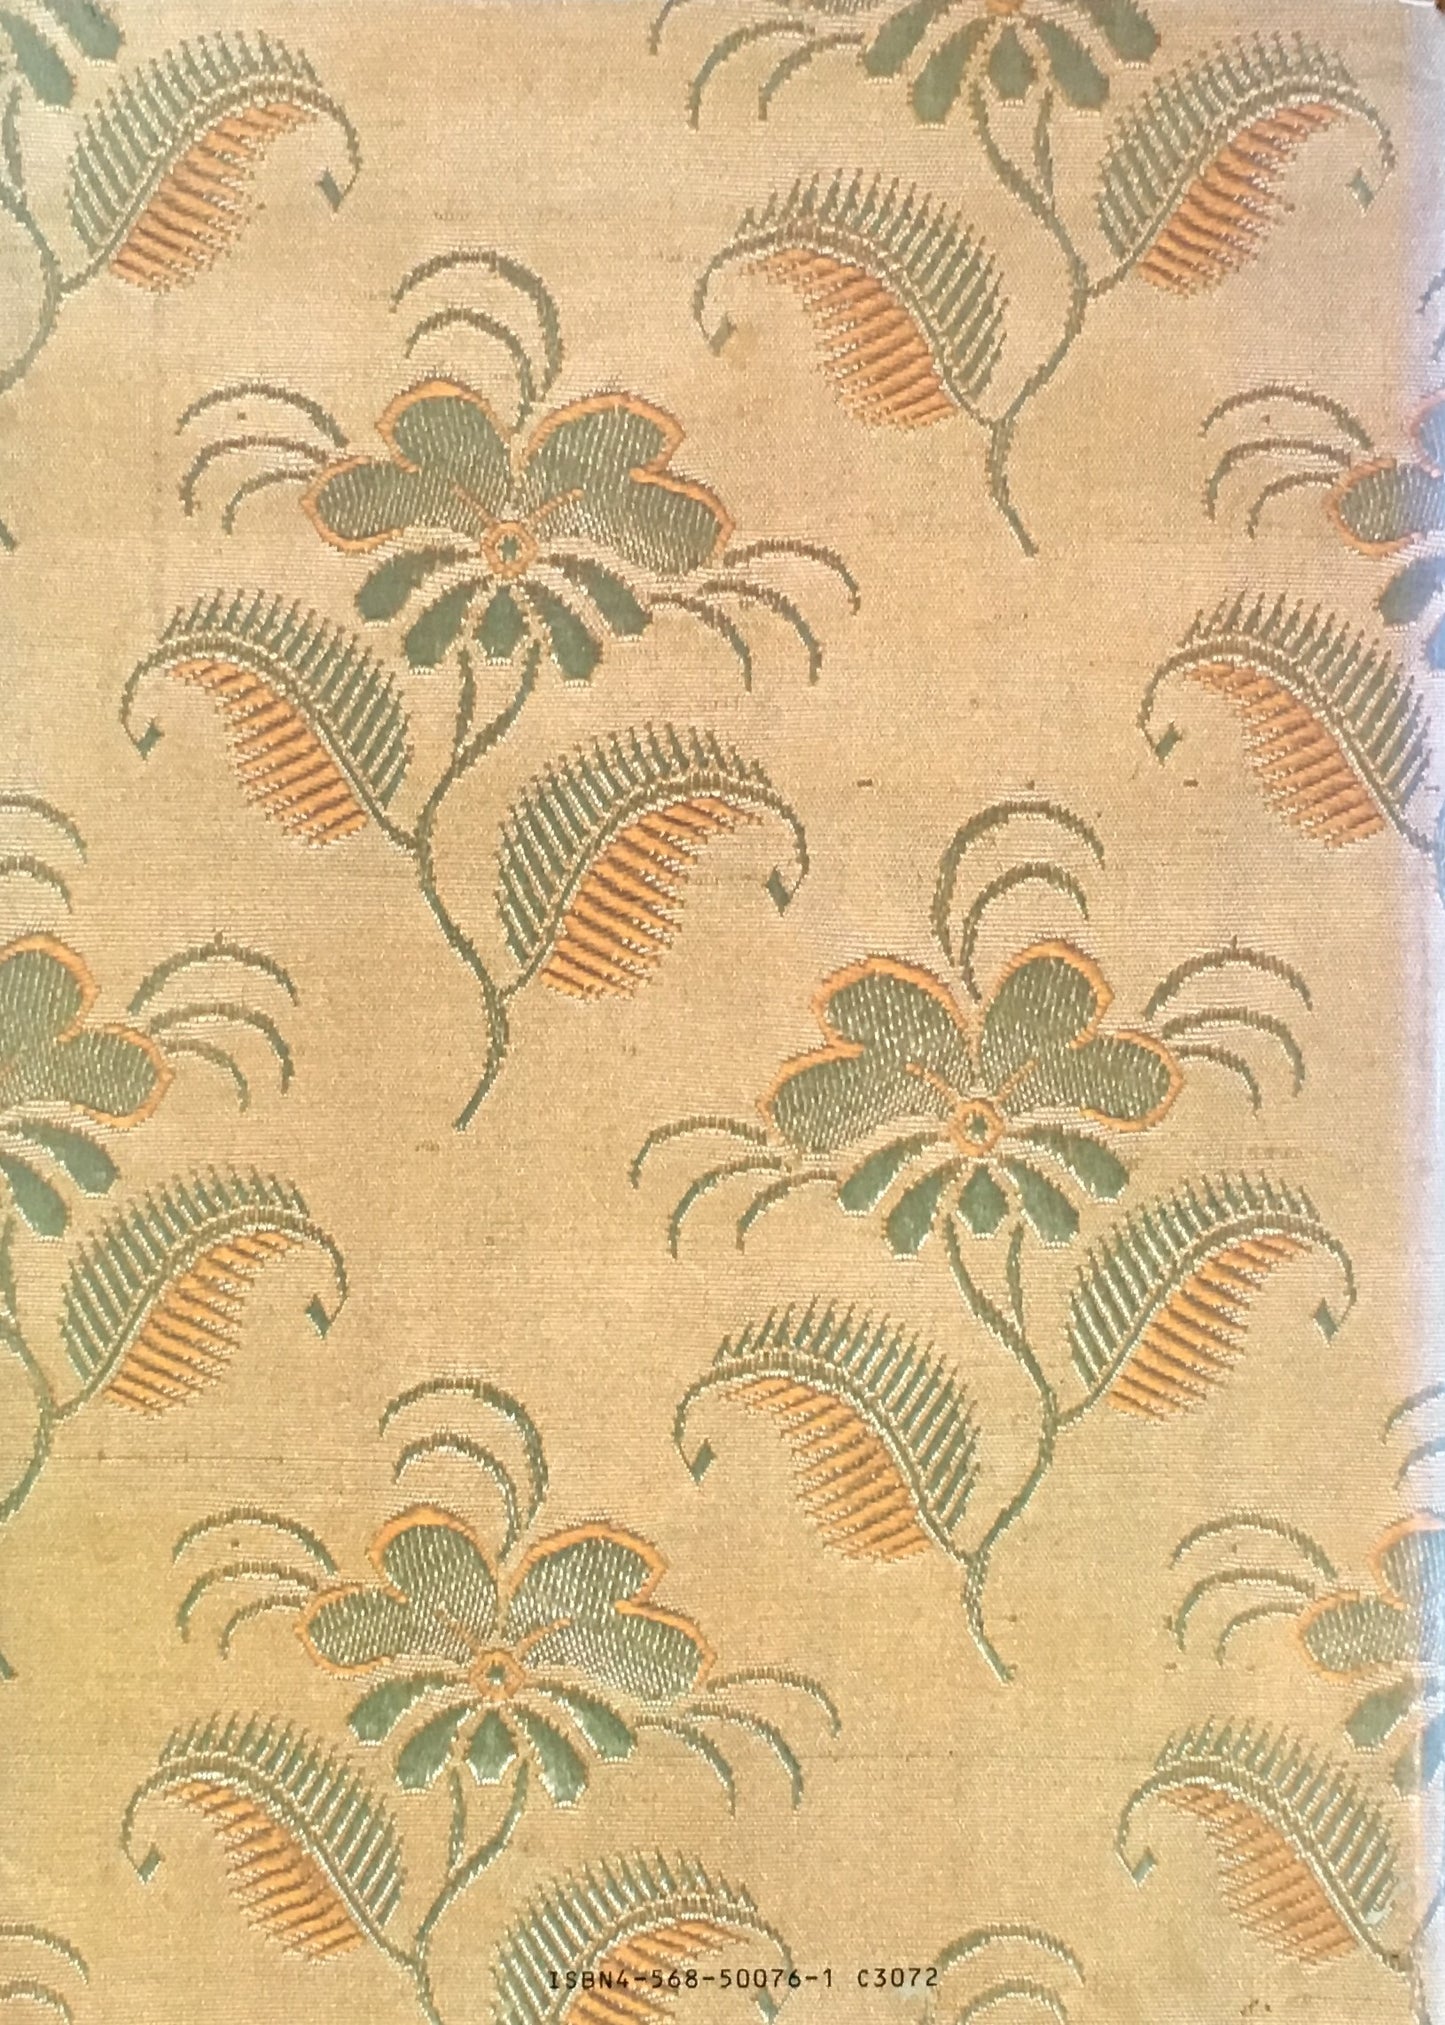 19th Century European TEXTILES　the KAMEI collection1 Dyeing,Weaving,and Wallpaper